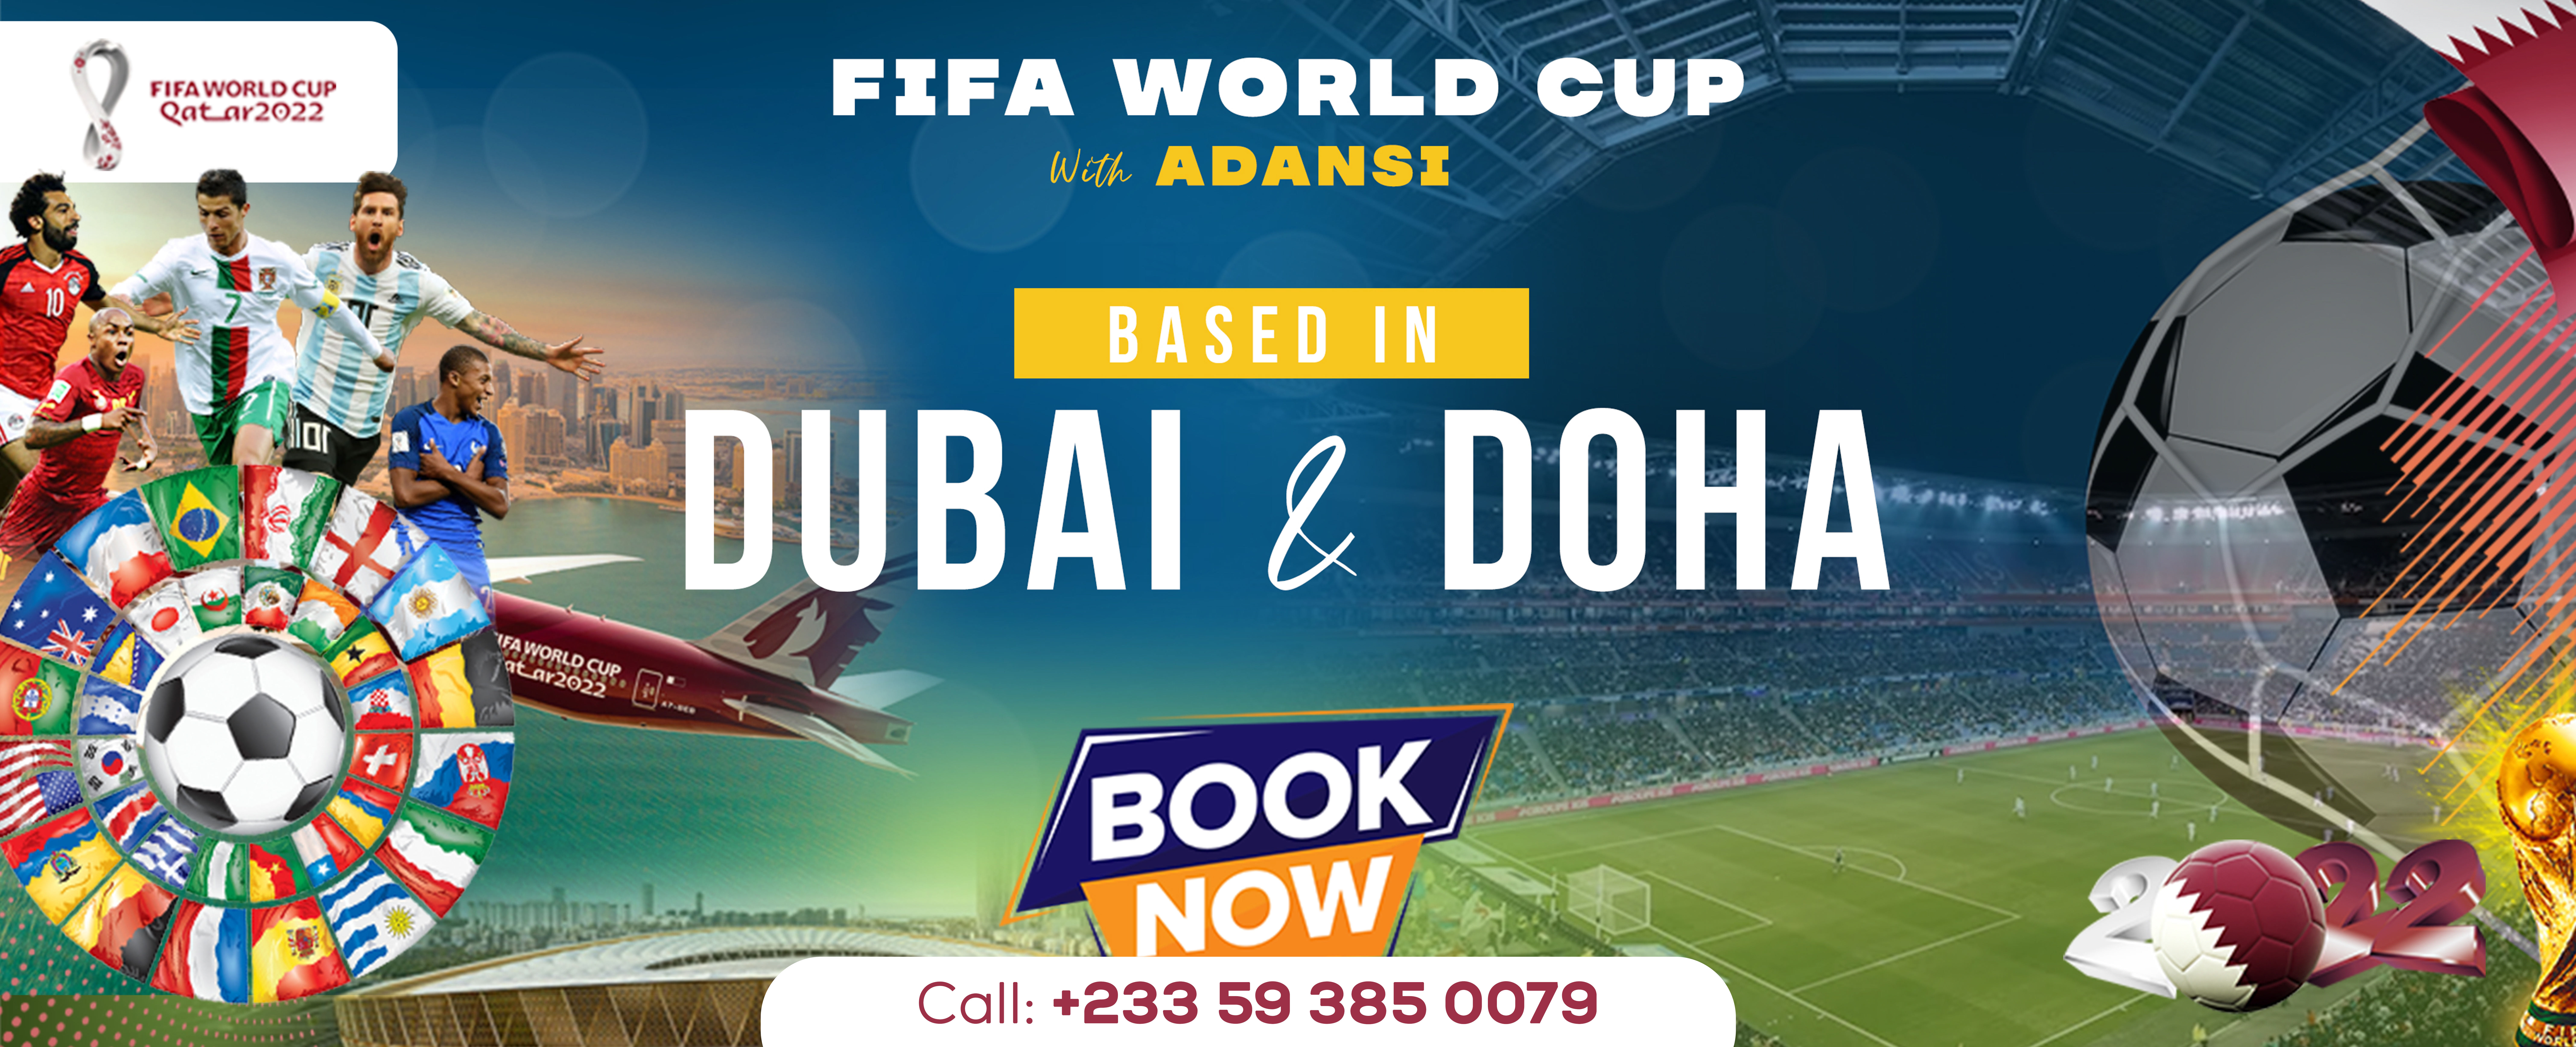 Travel for FIFA World Cup with Adansi